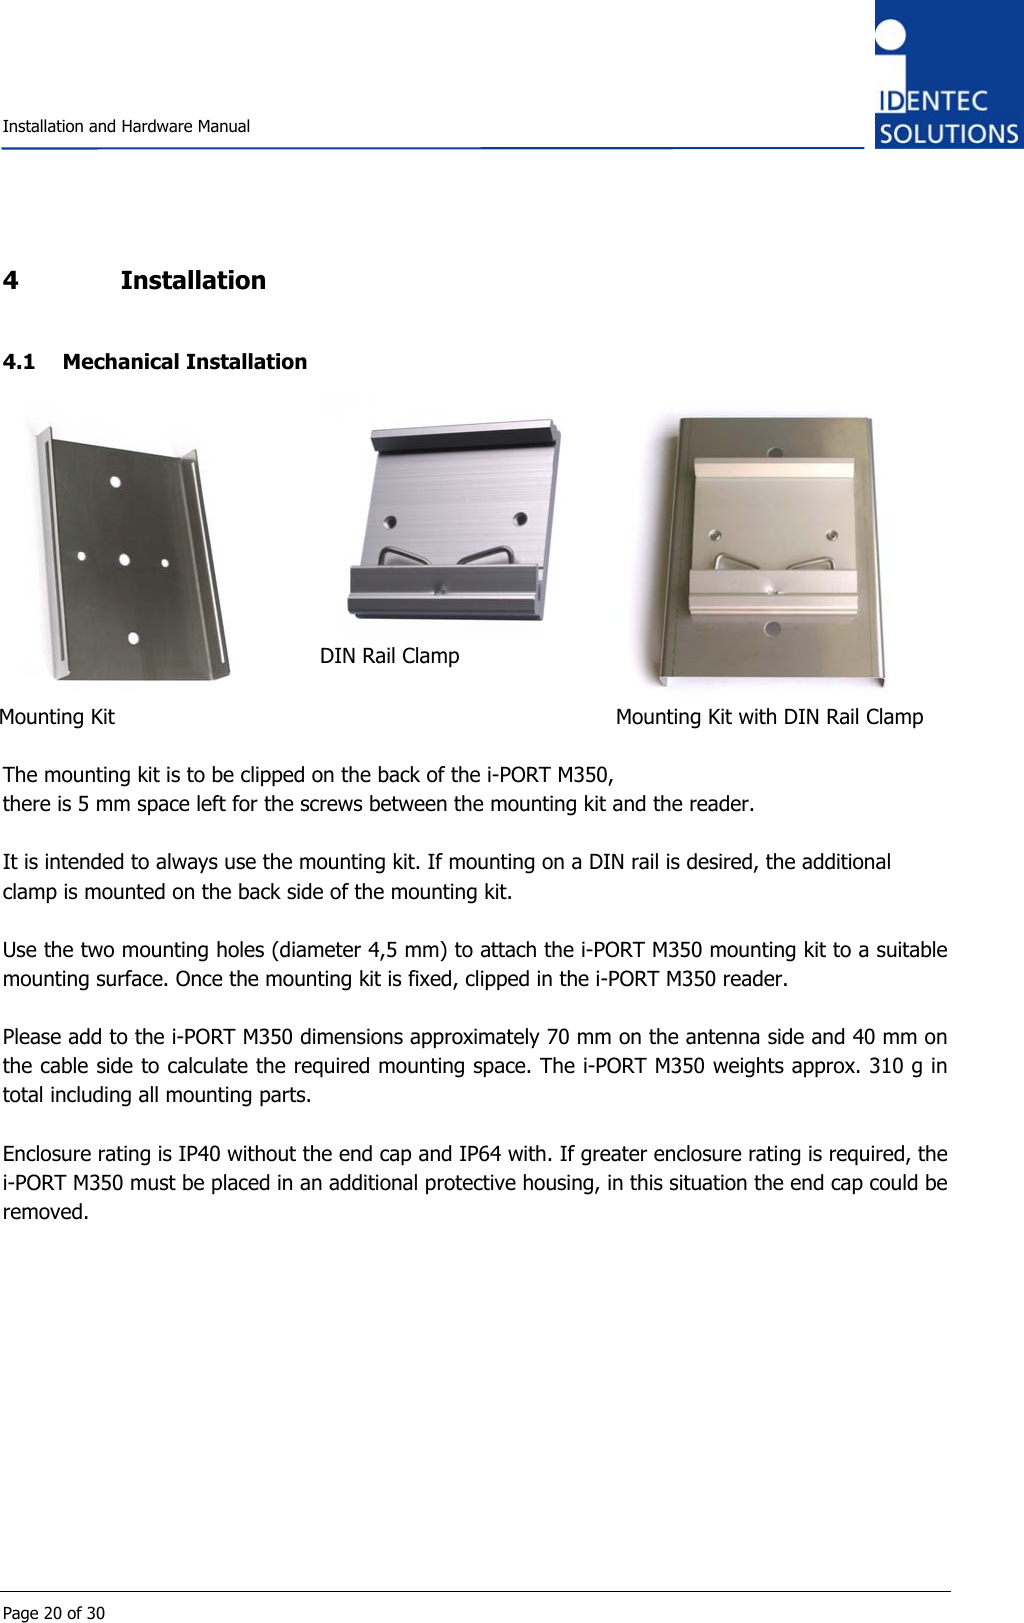    Installation and Hardware Manual  Page 20 of 30 4 Installation 4.1 Mechanical Installation  Mounting Kit  DIN Rail Clamp  Mounting Kit with DIN Rail Clamp  The mounting kit is to be clipped on the back of the i-PORT M350, there is 5 mm space left for the screws between the mounting kit and the reader.  It is intended to always use the mounting kit. If mounting on a DIN rail is desired, the additional clamp is mounted on the back side of the mounting kit.  Use the two mounting holes (diameter 4,5 mm) to attach the i-PORT M350 mounting kit to a suitable mounting surface. Once the mounting kit is fixed, clipped in the i-PORT M350 reader.  Please add to the i-PORT M350 dimensions approximately 70 mm on the antenna side and 40 mm on the cable side to calculate the required mounting space. The i-PORT M350 weights approx. 310 g in total including all mounting parts.   Enclosure rating is IP40 without the end cap and IP64 with. If greater enclosure rating is required, the i-PORT M350 must be placed in an additional protective housing, in this situation the end cap could be removed.  